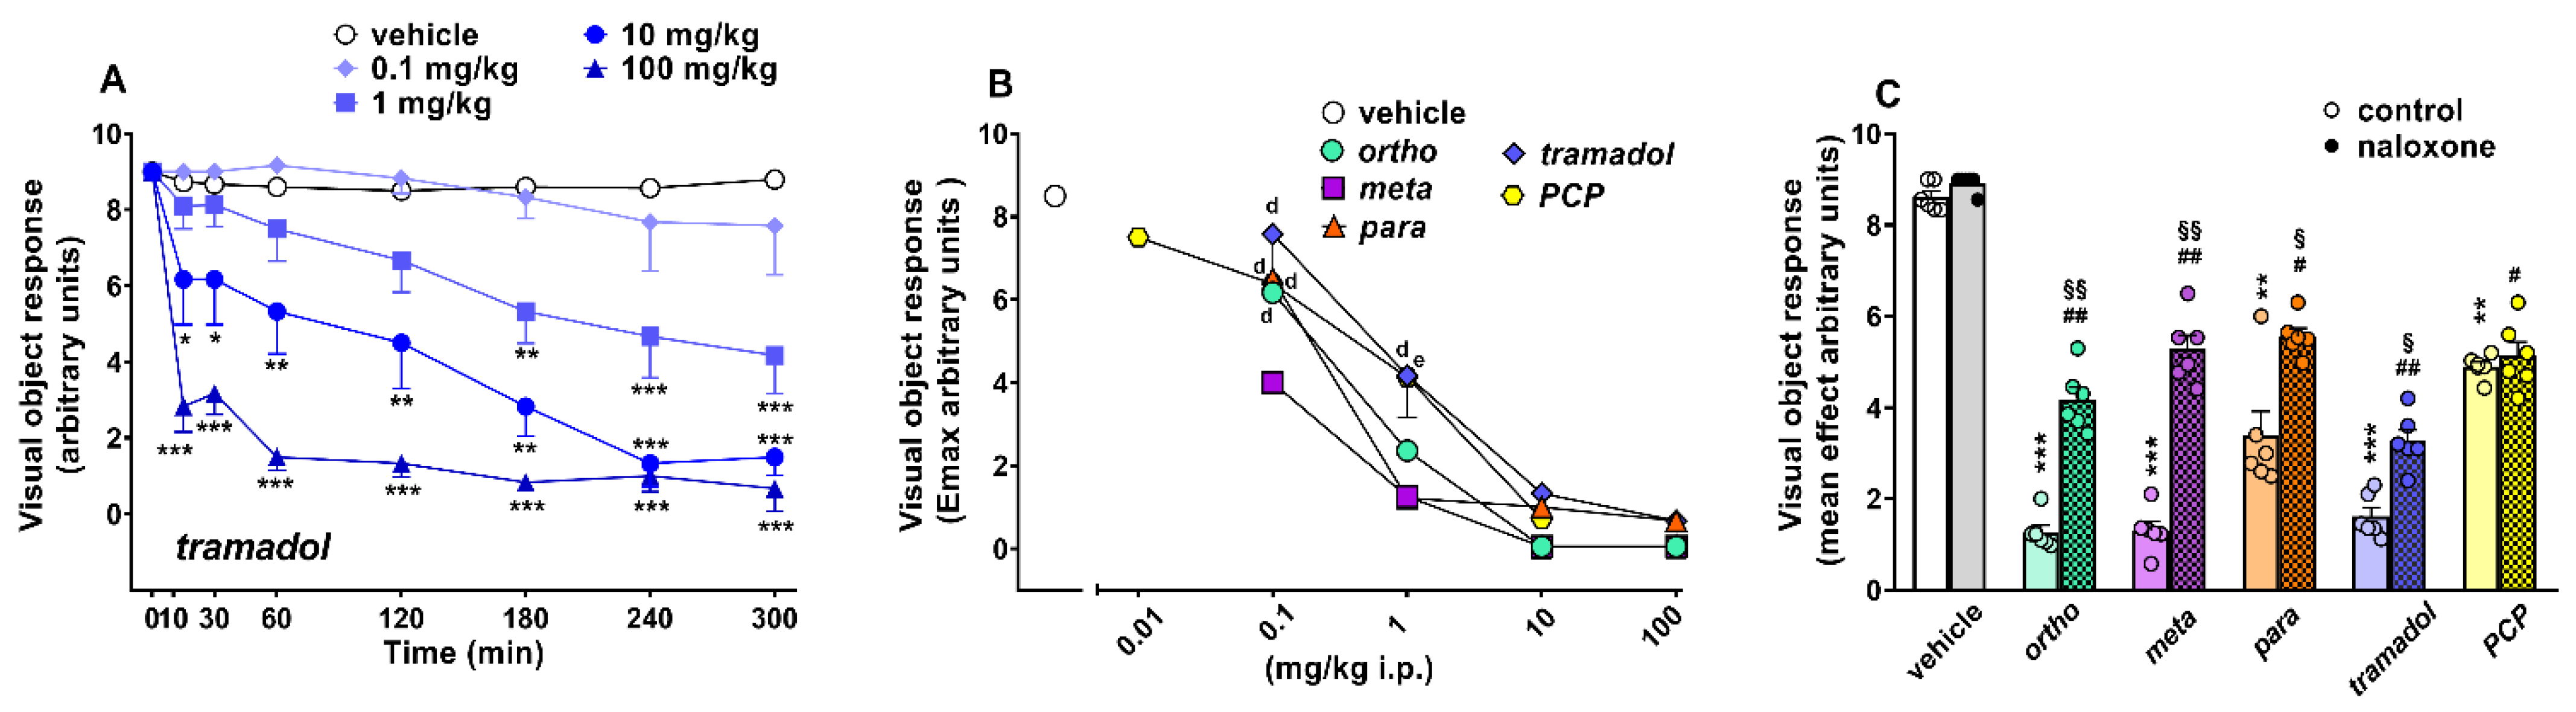 IJMS | Free Full-Text | In Vitro and In Vivo Pharmaco-Toxicological  Characterization of 1-Cyclohexyl-x-methoxybenzene Derivatives in Mice:  Comparison with Tramadol and PCP